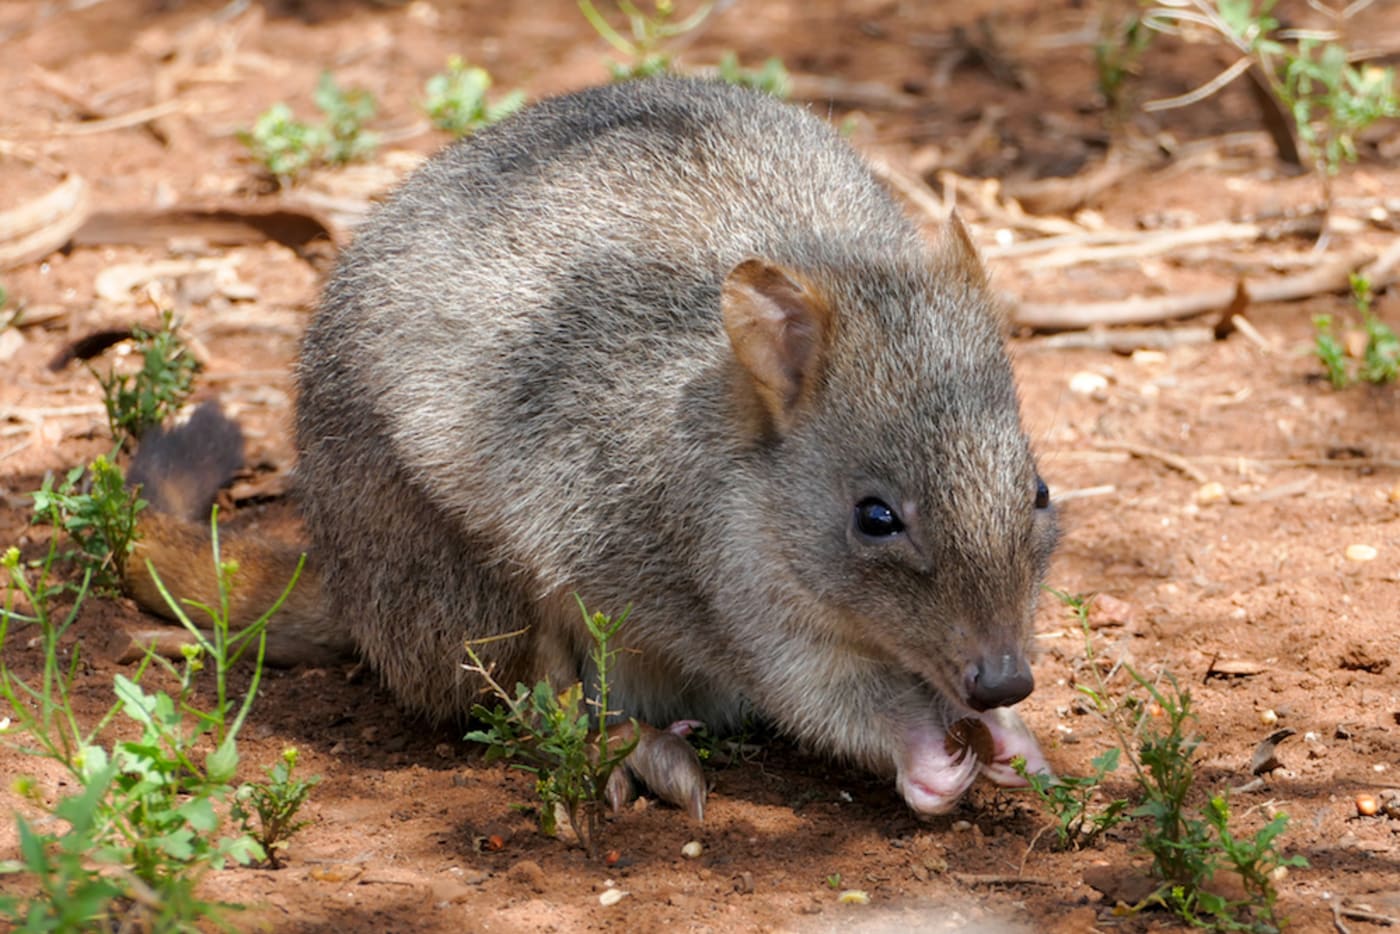 A brush tailed bettong